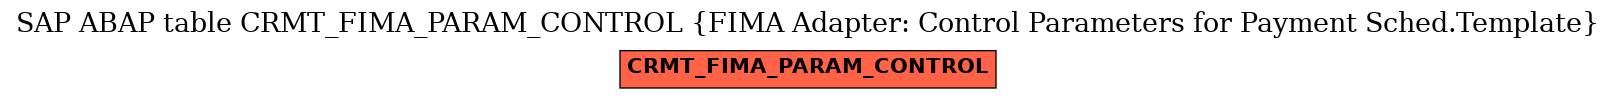 E-R Diagram for table CRMT_FIMA_PARAM_CONTROL (FIMA Adapter: Control Parameters for Payment Sched.Template)